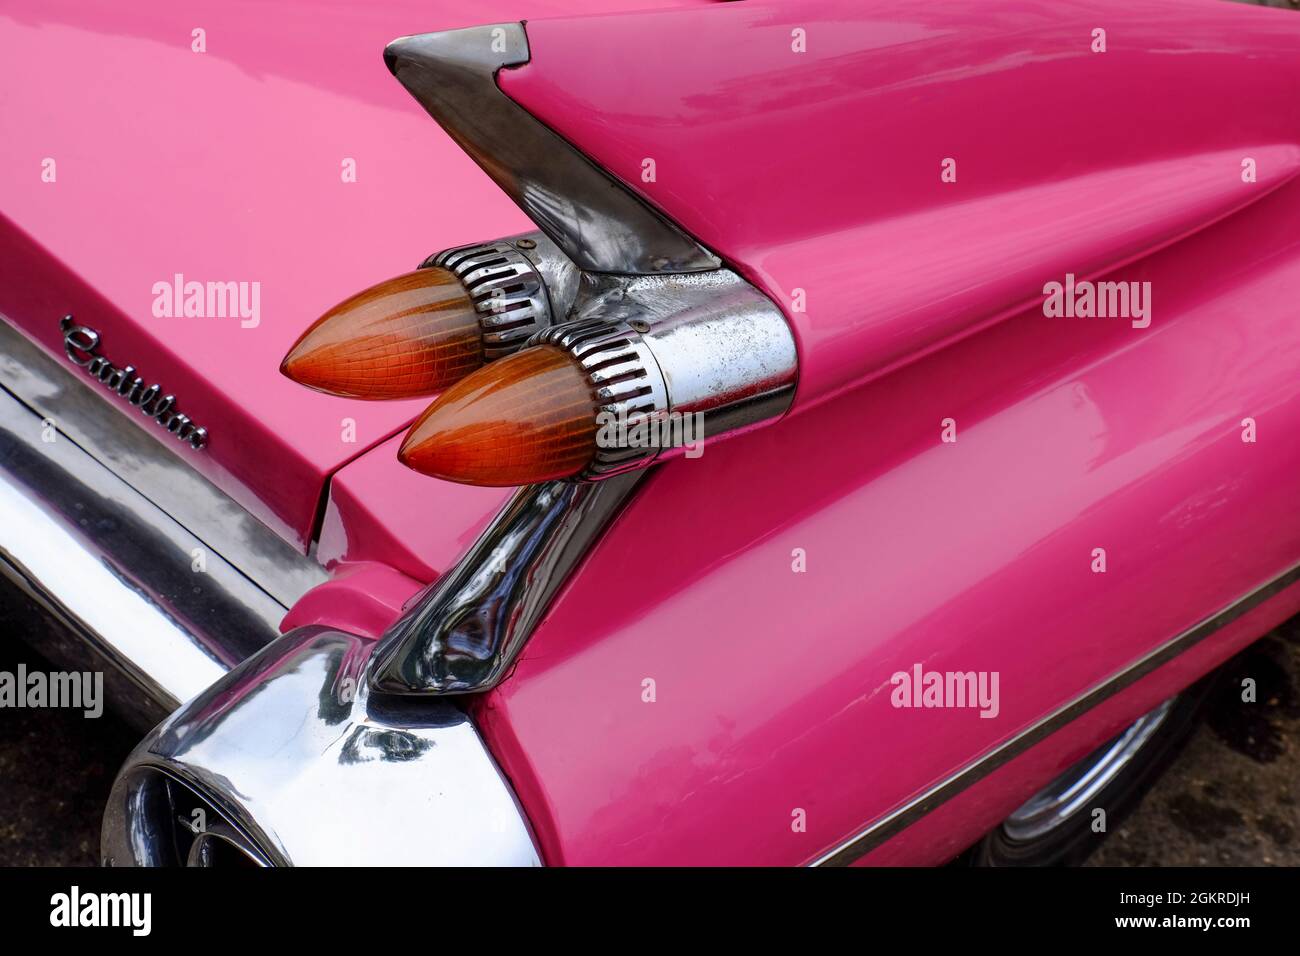 Rear fin and lights of vintage pink Cadillac, Havana, Cuba, West Indies, Central America Stock Photo